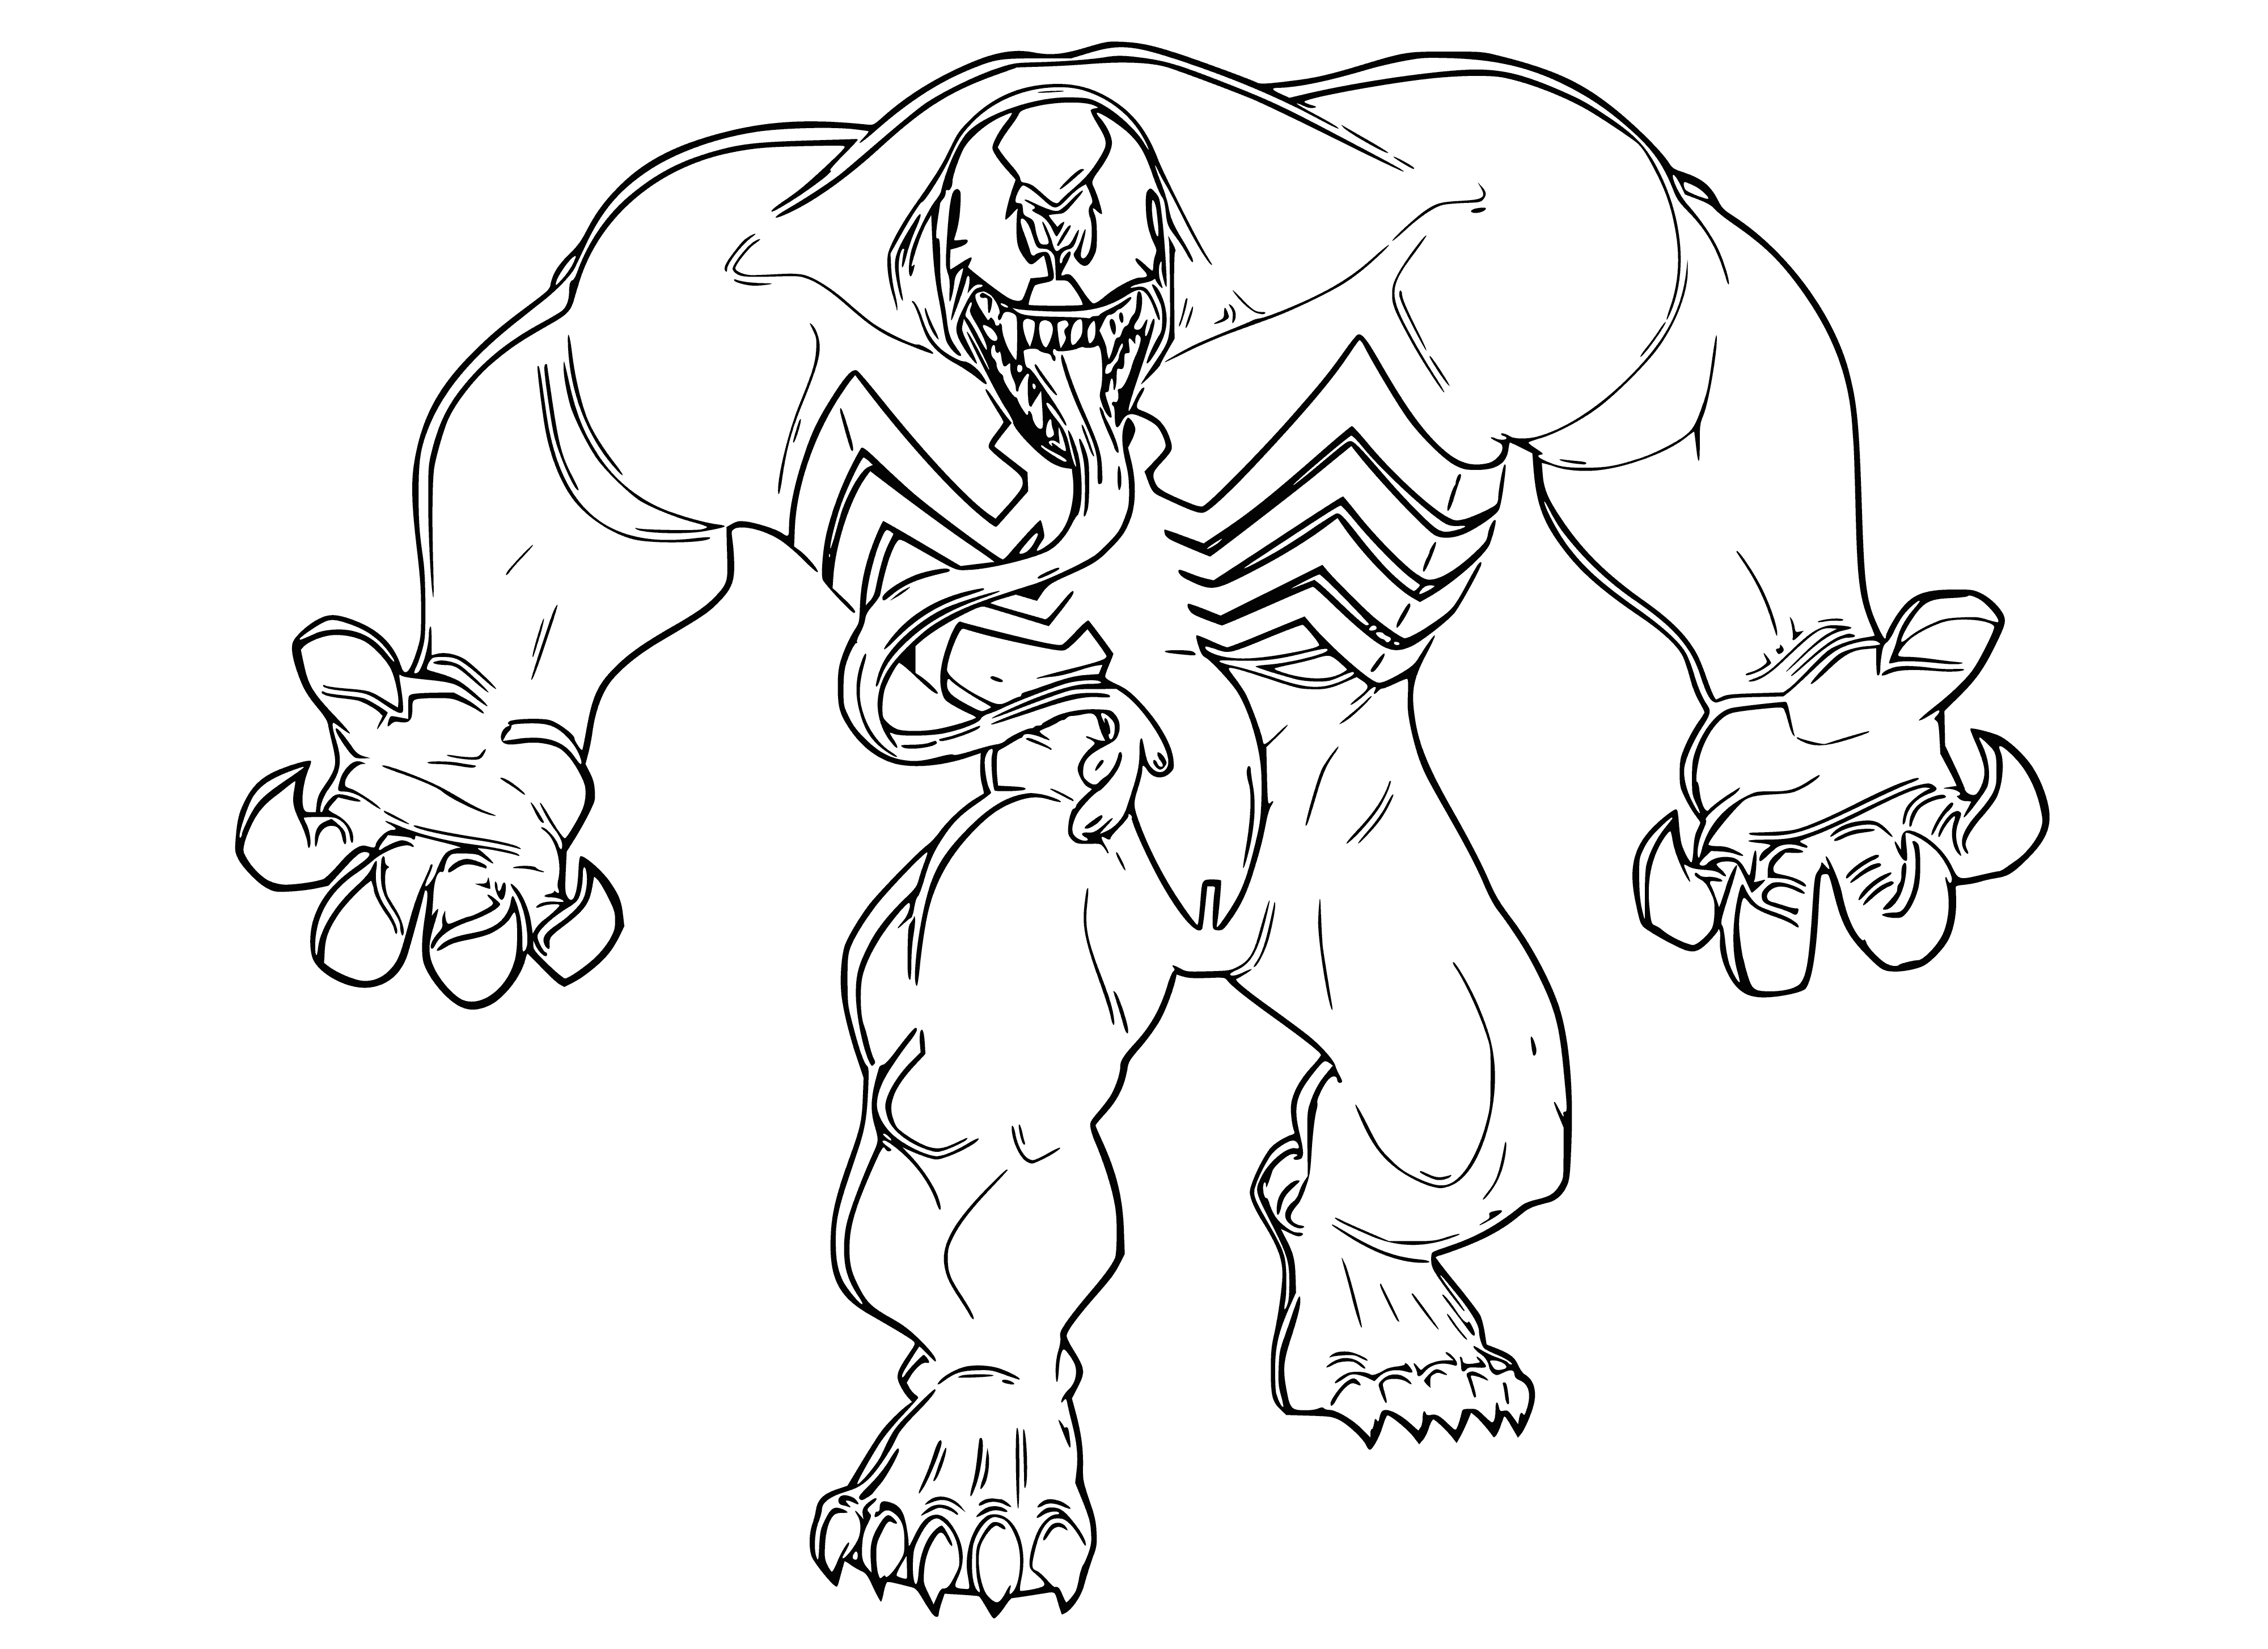 coloring page: Spider-Man & Venom battle: Venom has long, sharp teeth & is trying to bite Spidey. But Spidey's tryin' to web Venom's mouth shut!